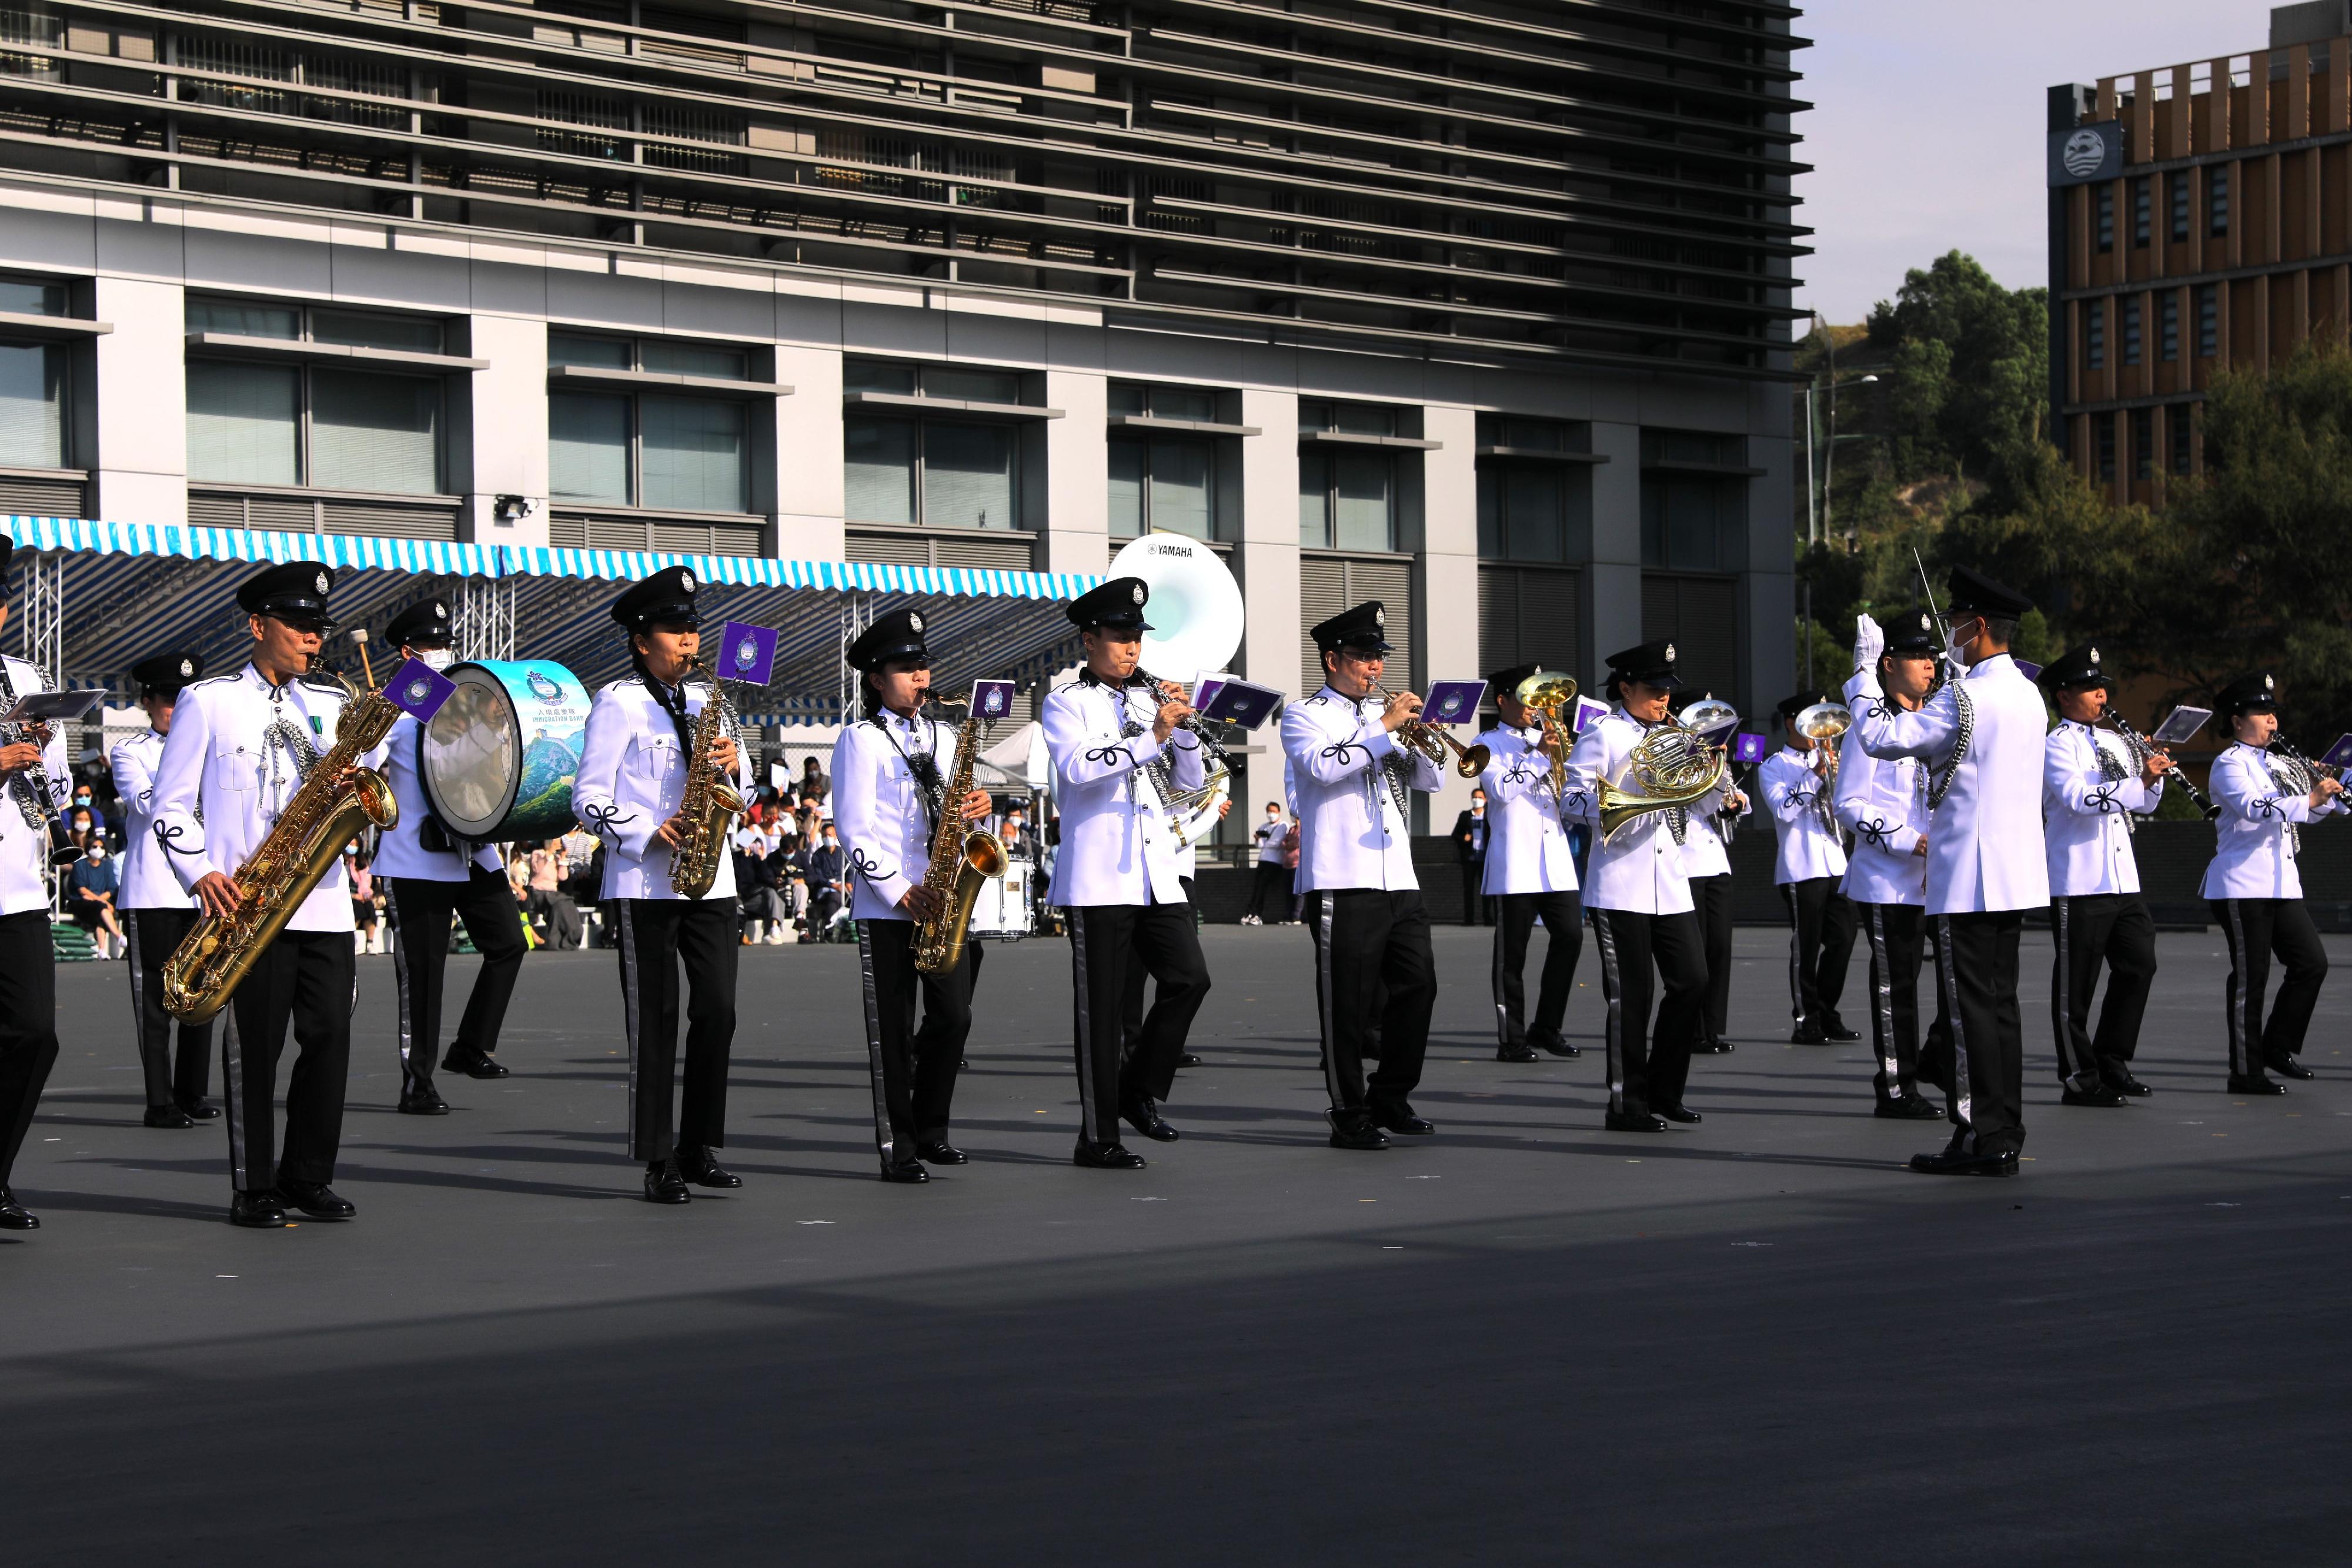 The Immigration Band performs at the Immigration Department Passing-out Parade today (December 2).